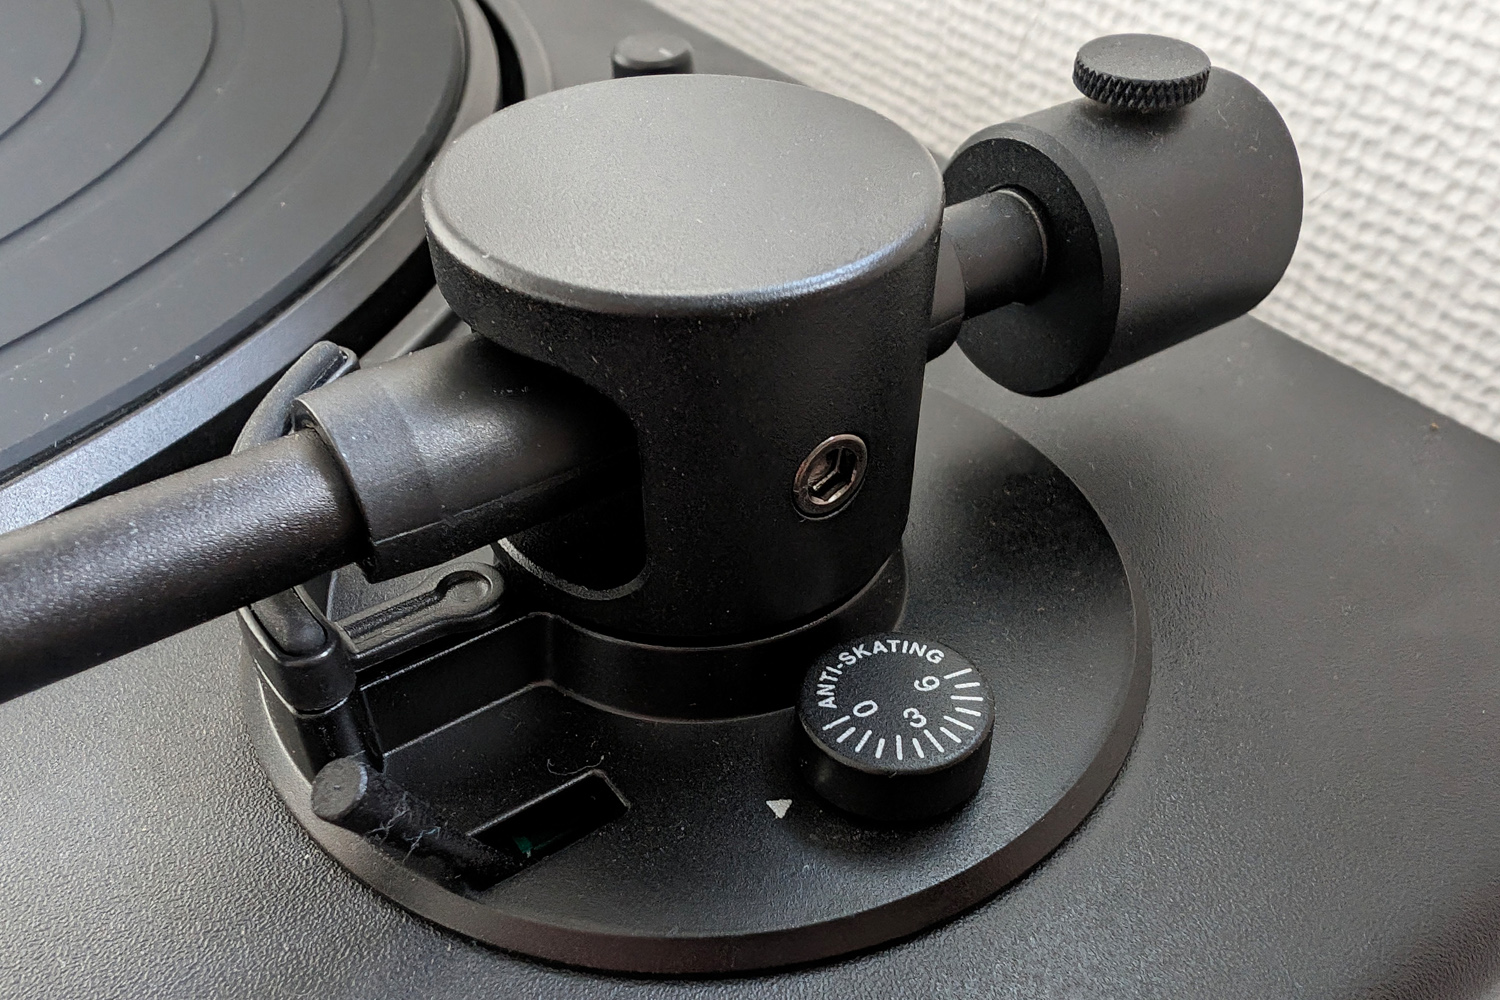 Victrola Hi-Res Onyx review counterweight